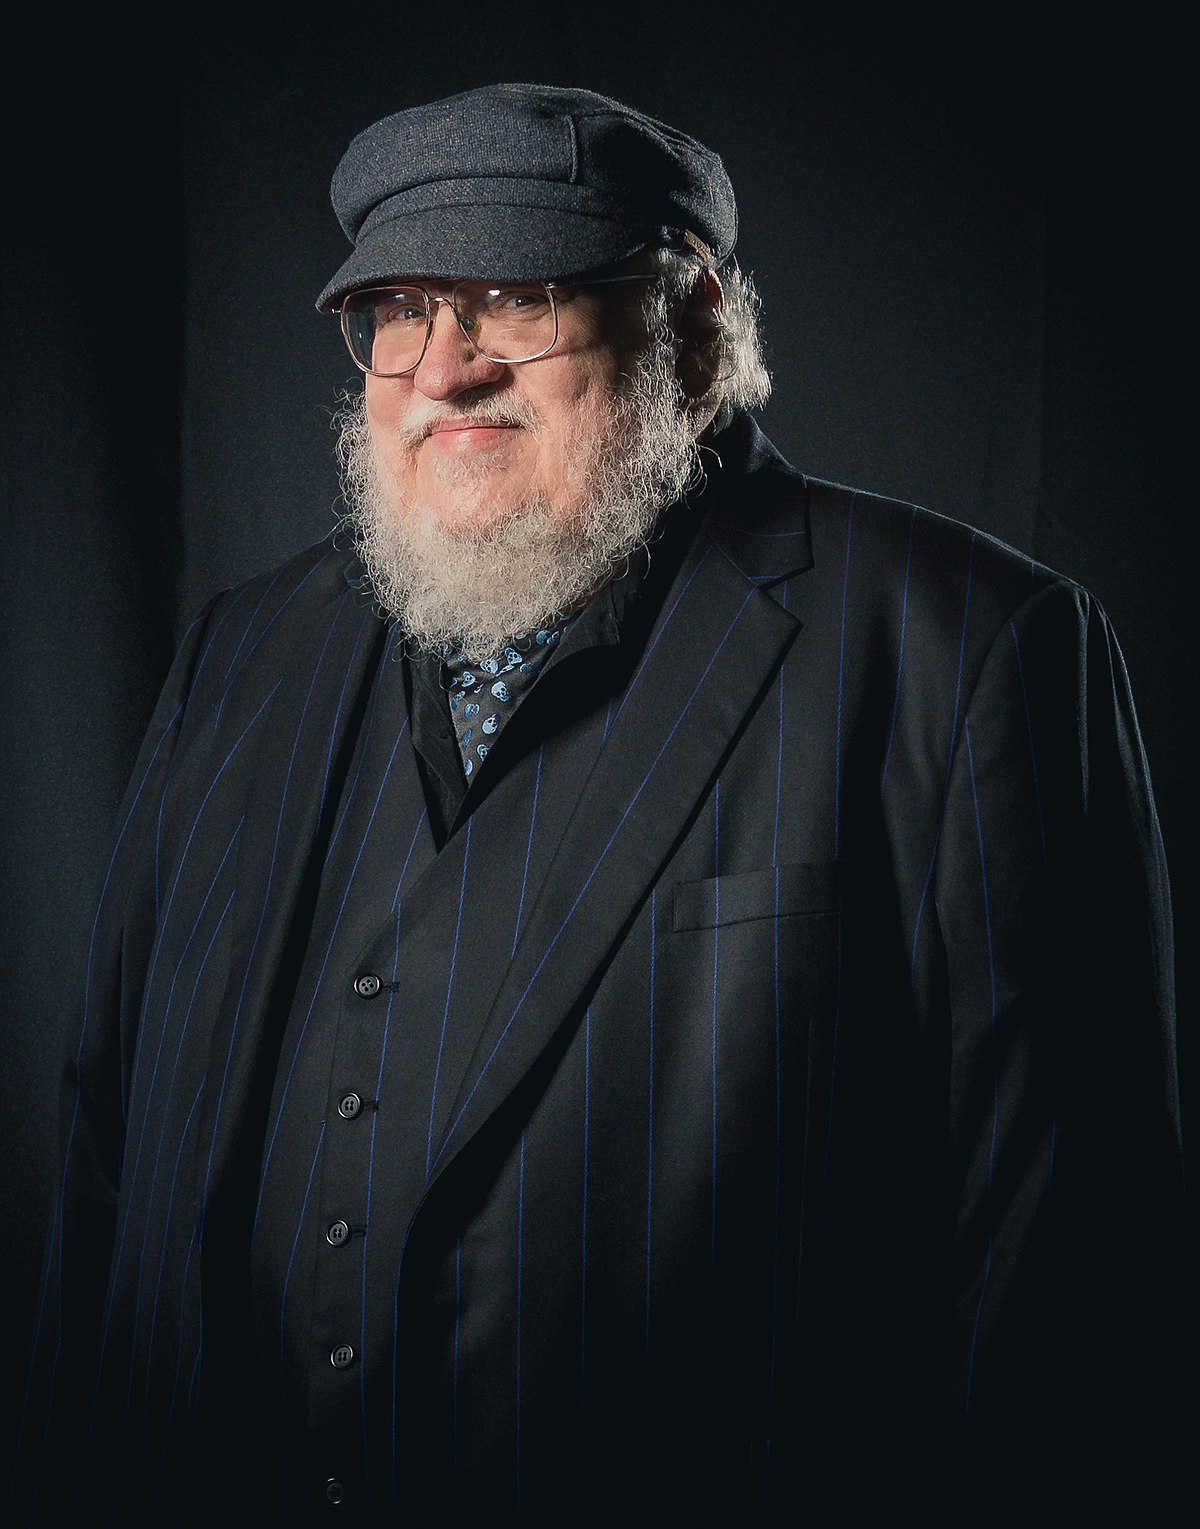 George R R Martin tests positive for COVID-19, skips 'House of the Dragon' premiere